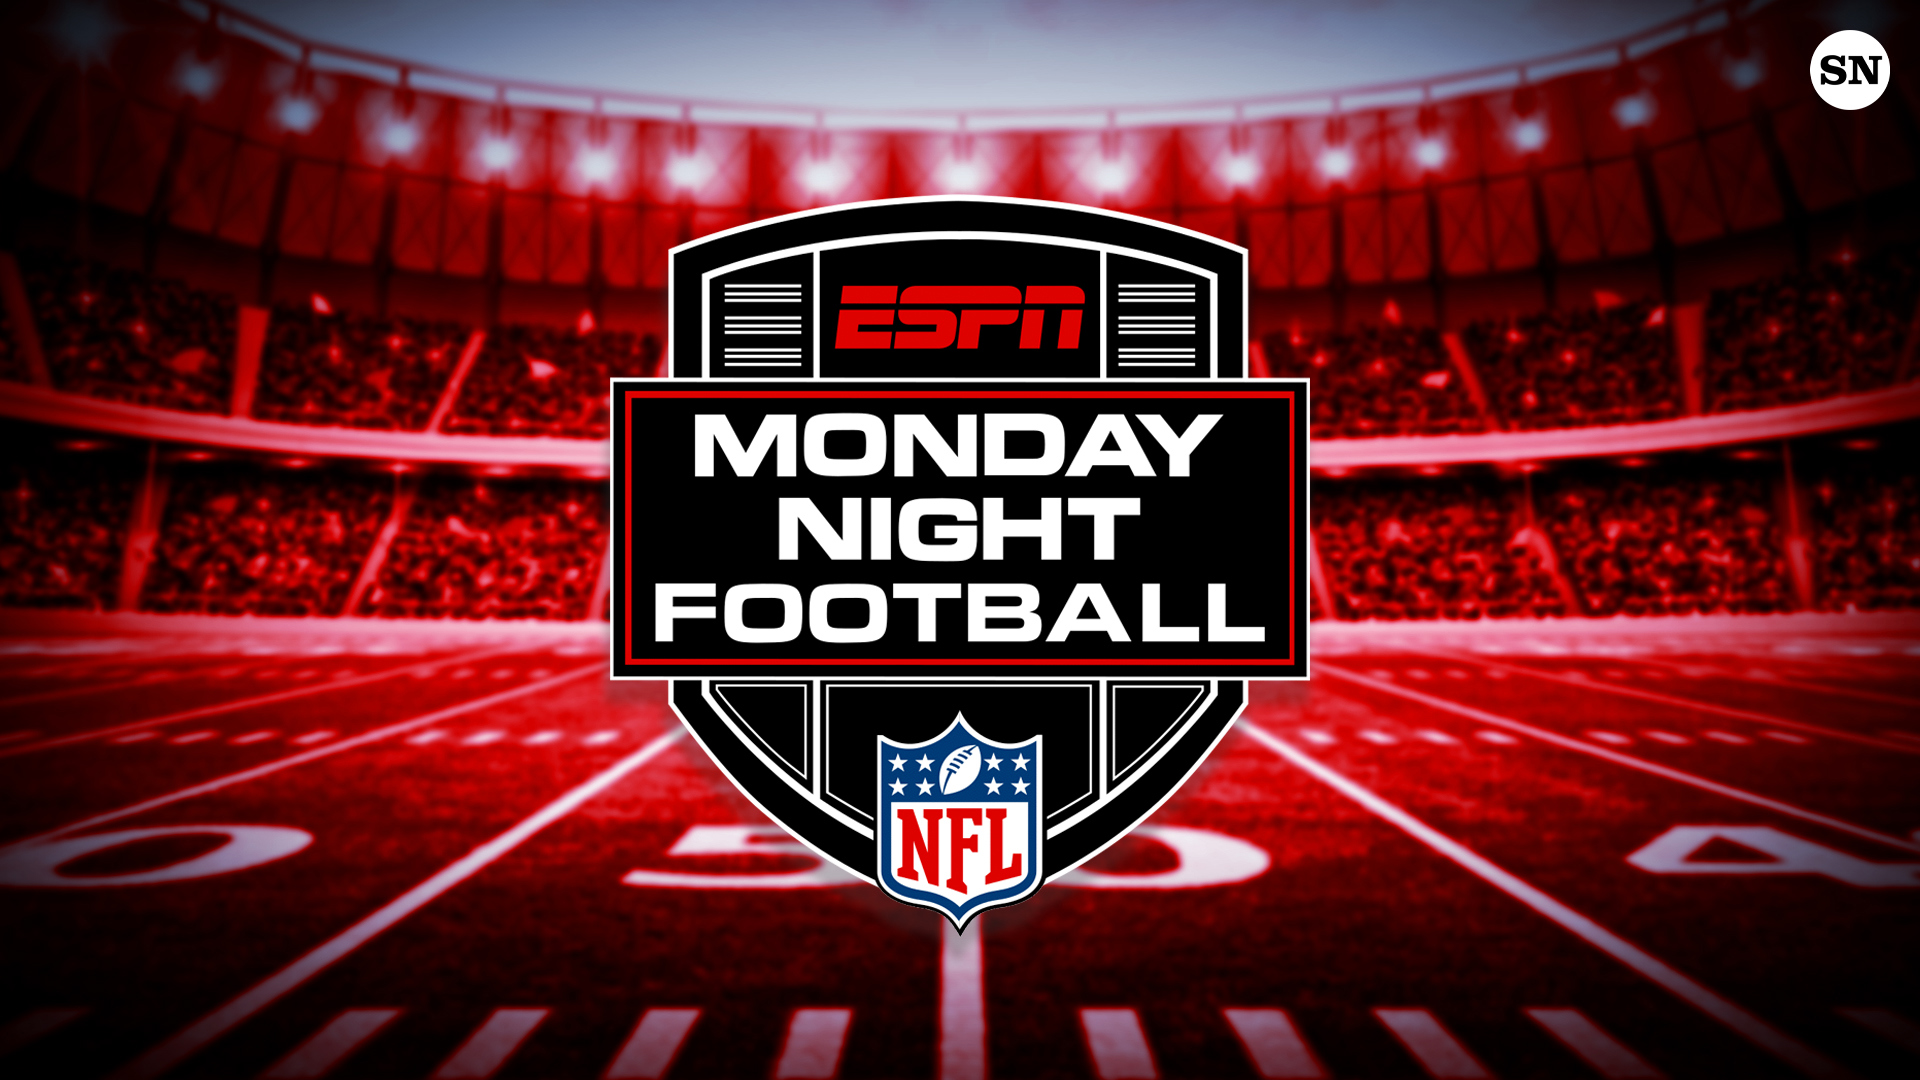 Monday Night Football schedule 2023 Dates, times, teams for ESPN's NFL